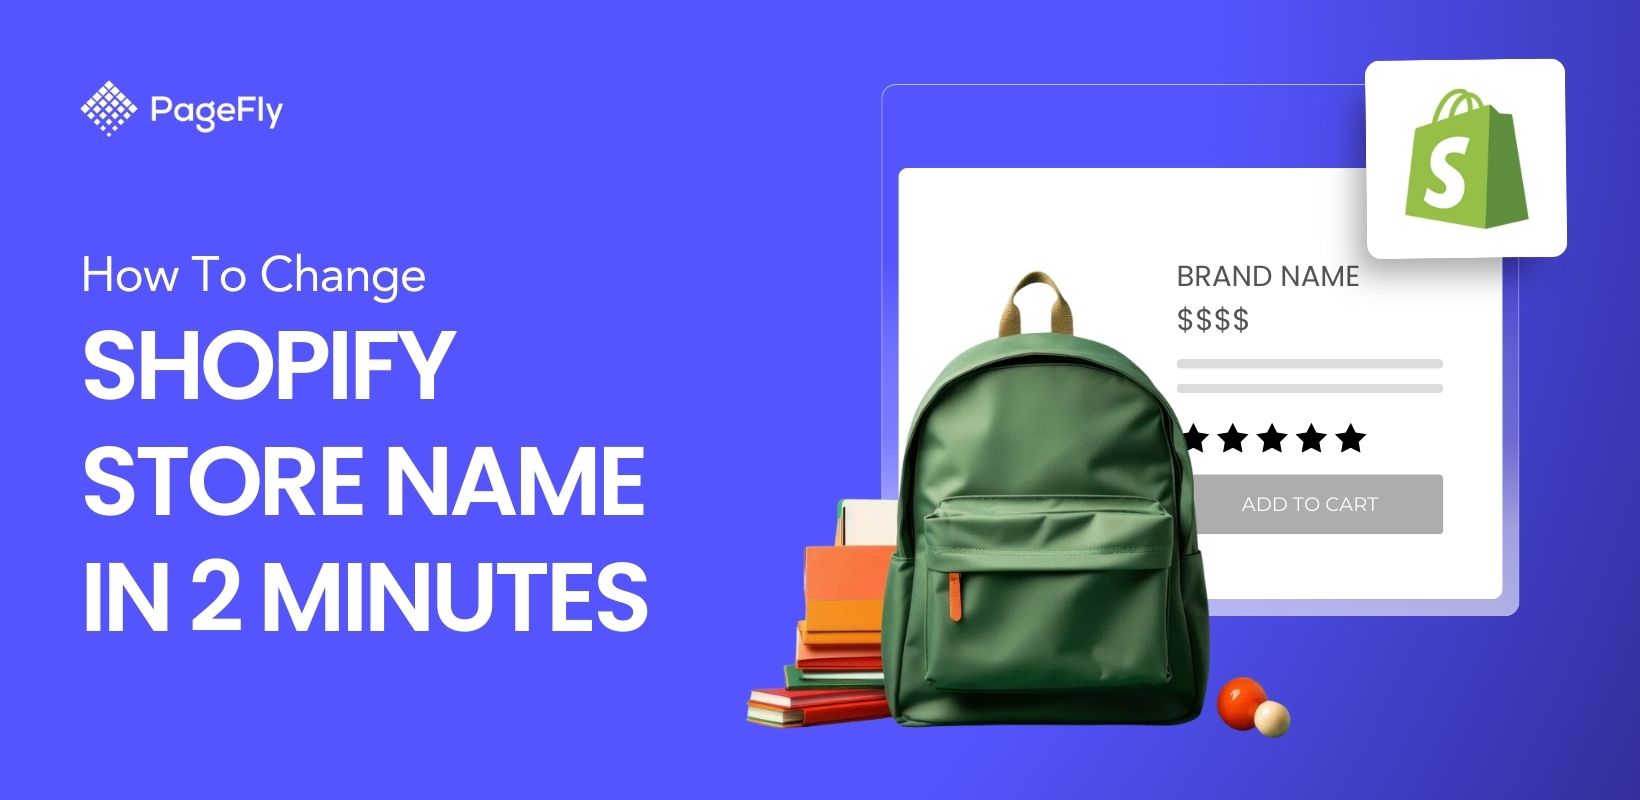 How to Change Shopify Store Name In Under 2 Minutes